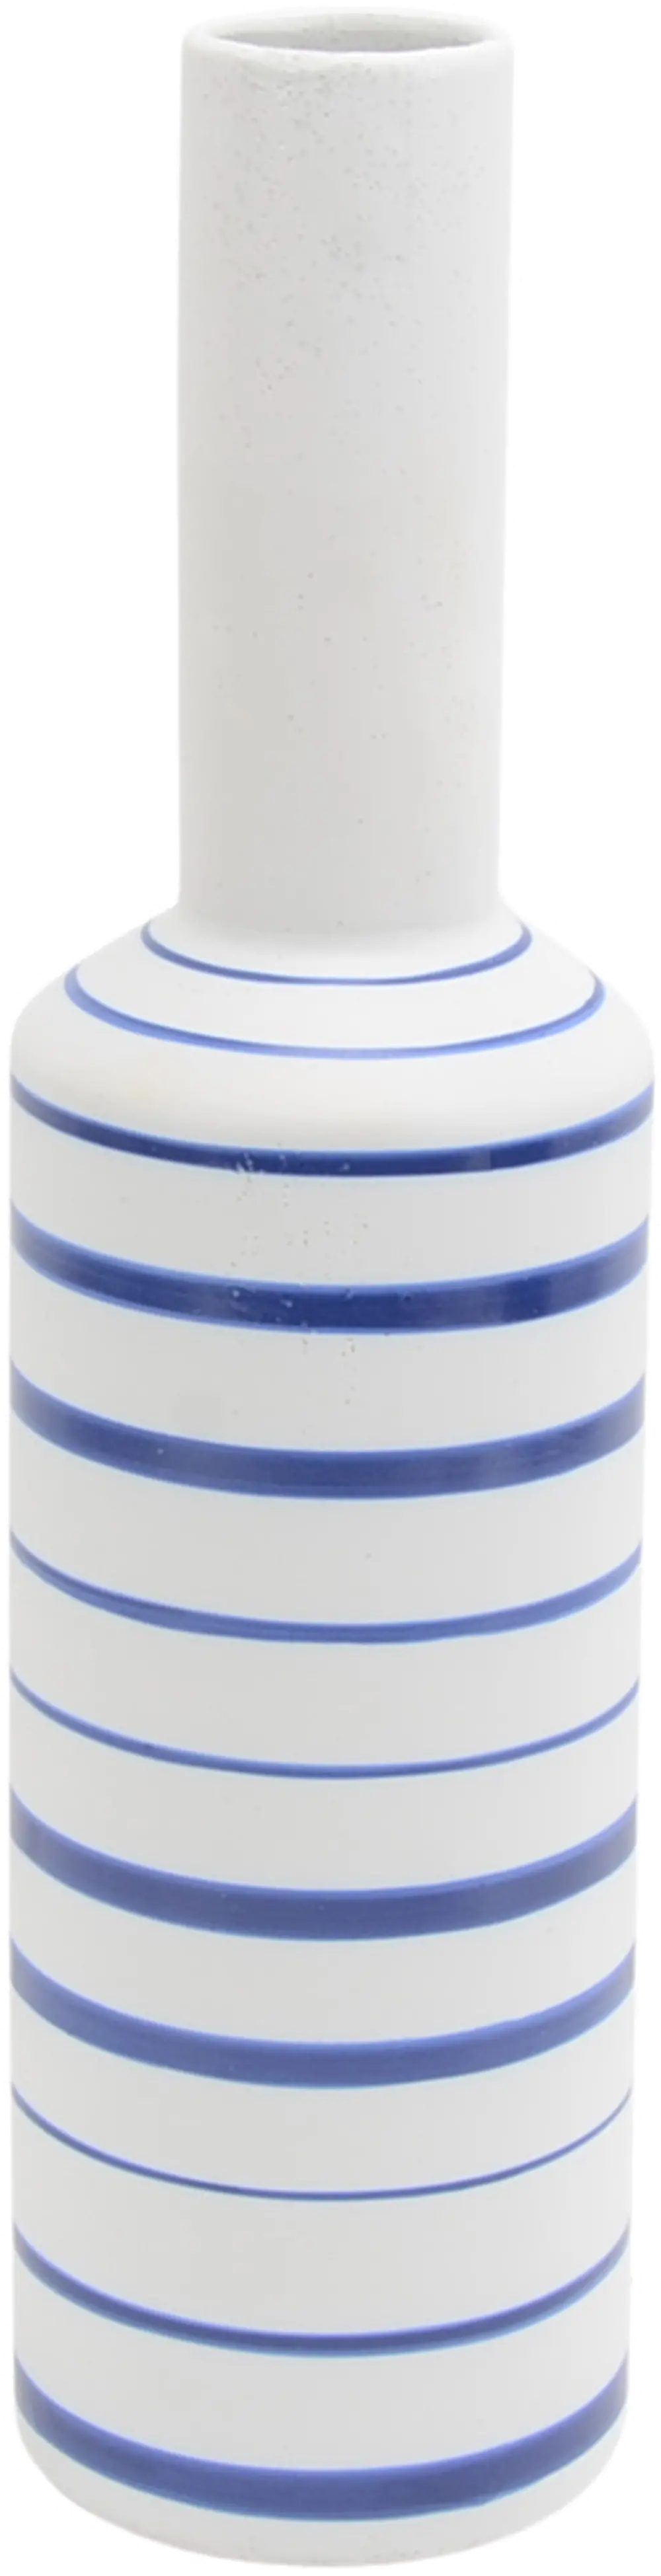 18 Inch White Vase with Blue Stripes-1